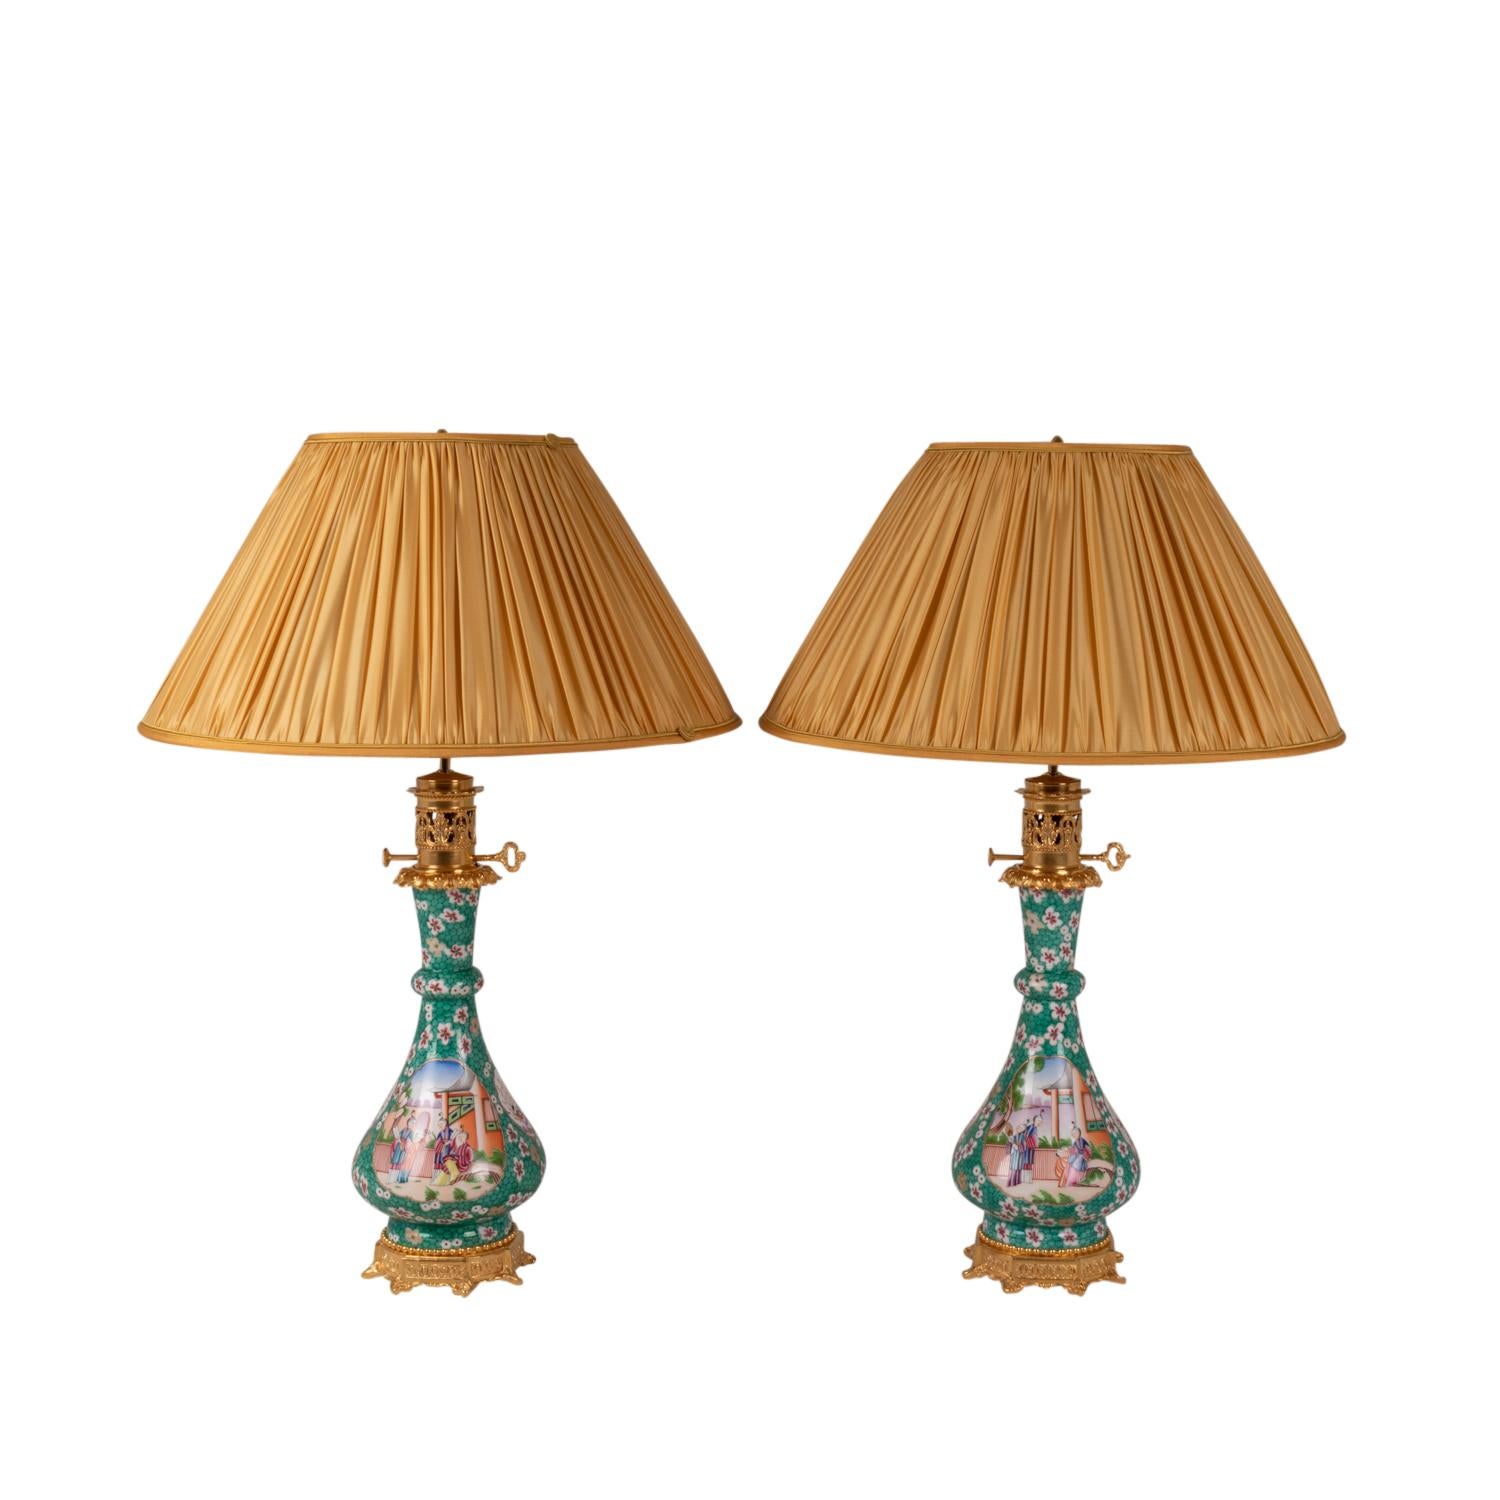 Pair of lamps in Canton porcelain and gilded bronze, adorned with characters, in shades of green.

French work realized circa 1880.

Système électrique neuf et fonctionnel! 

! The price indicated does not include that of the lampshade.